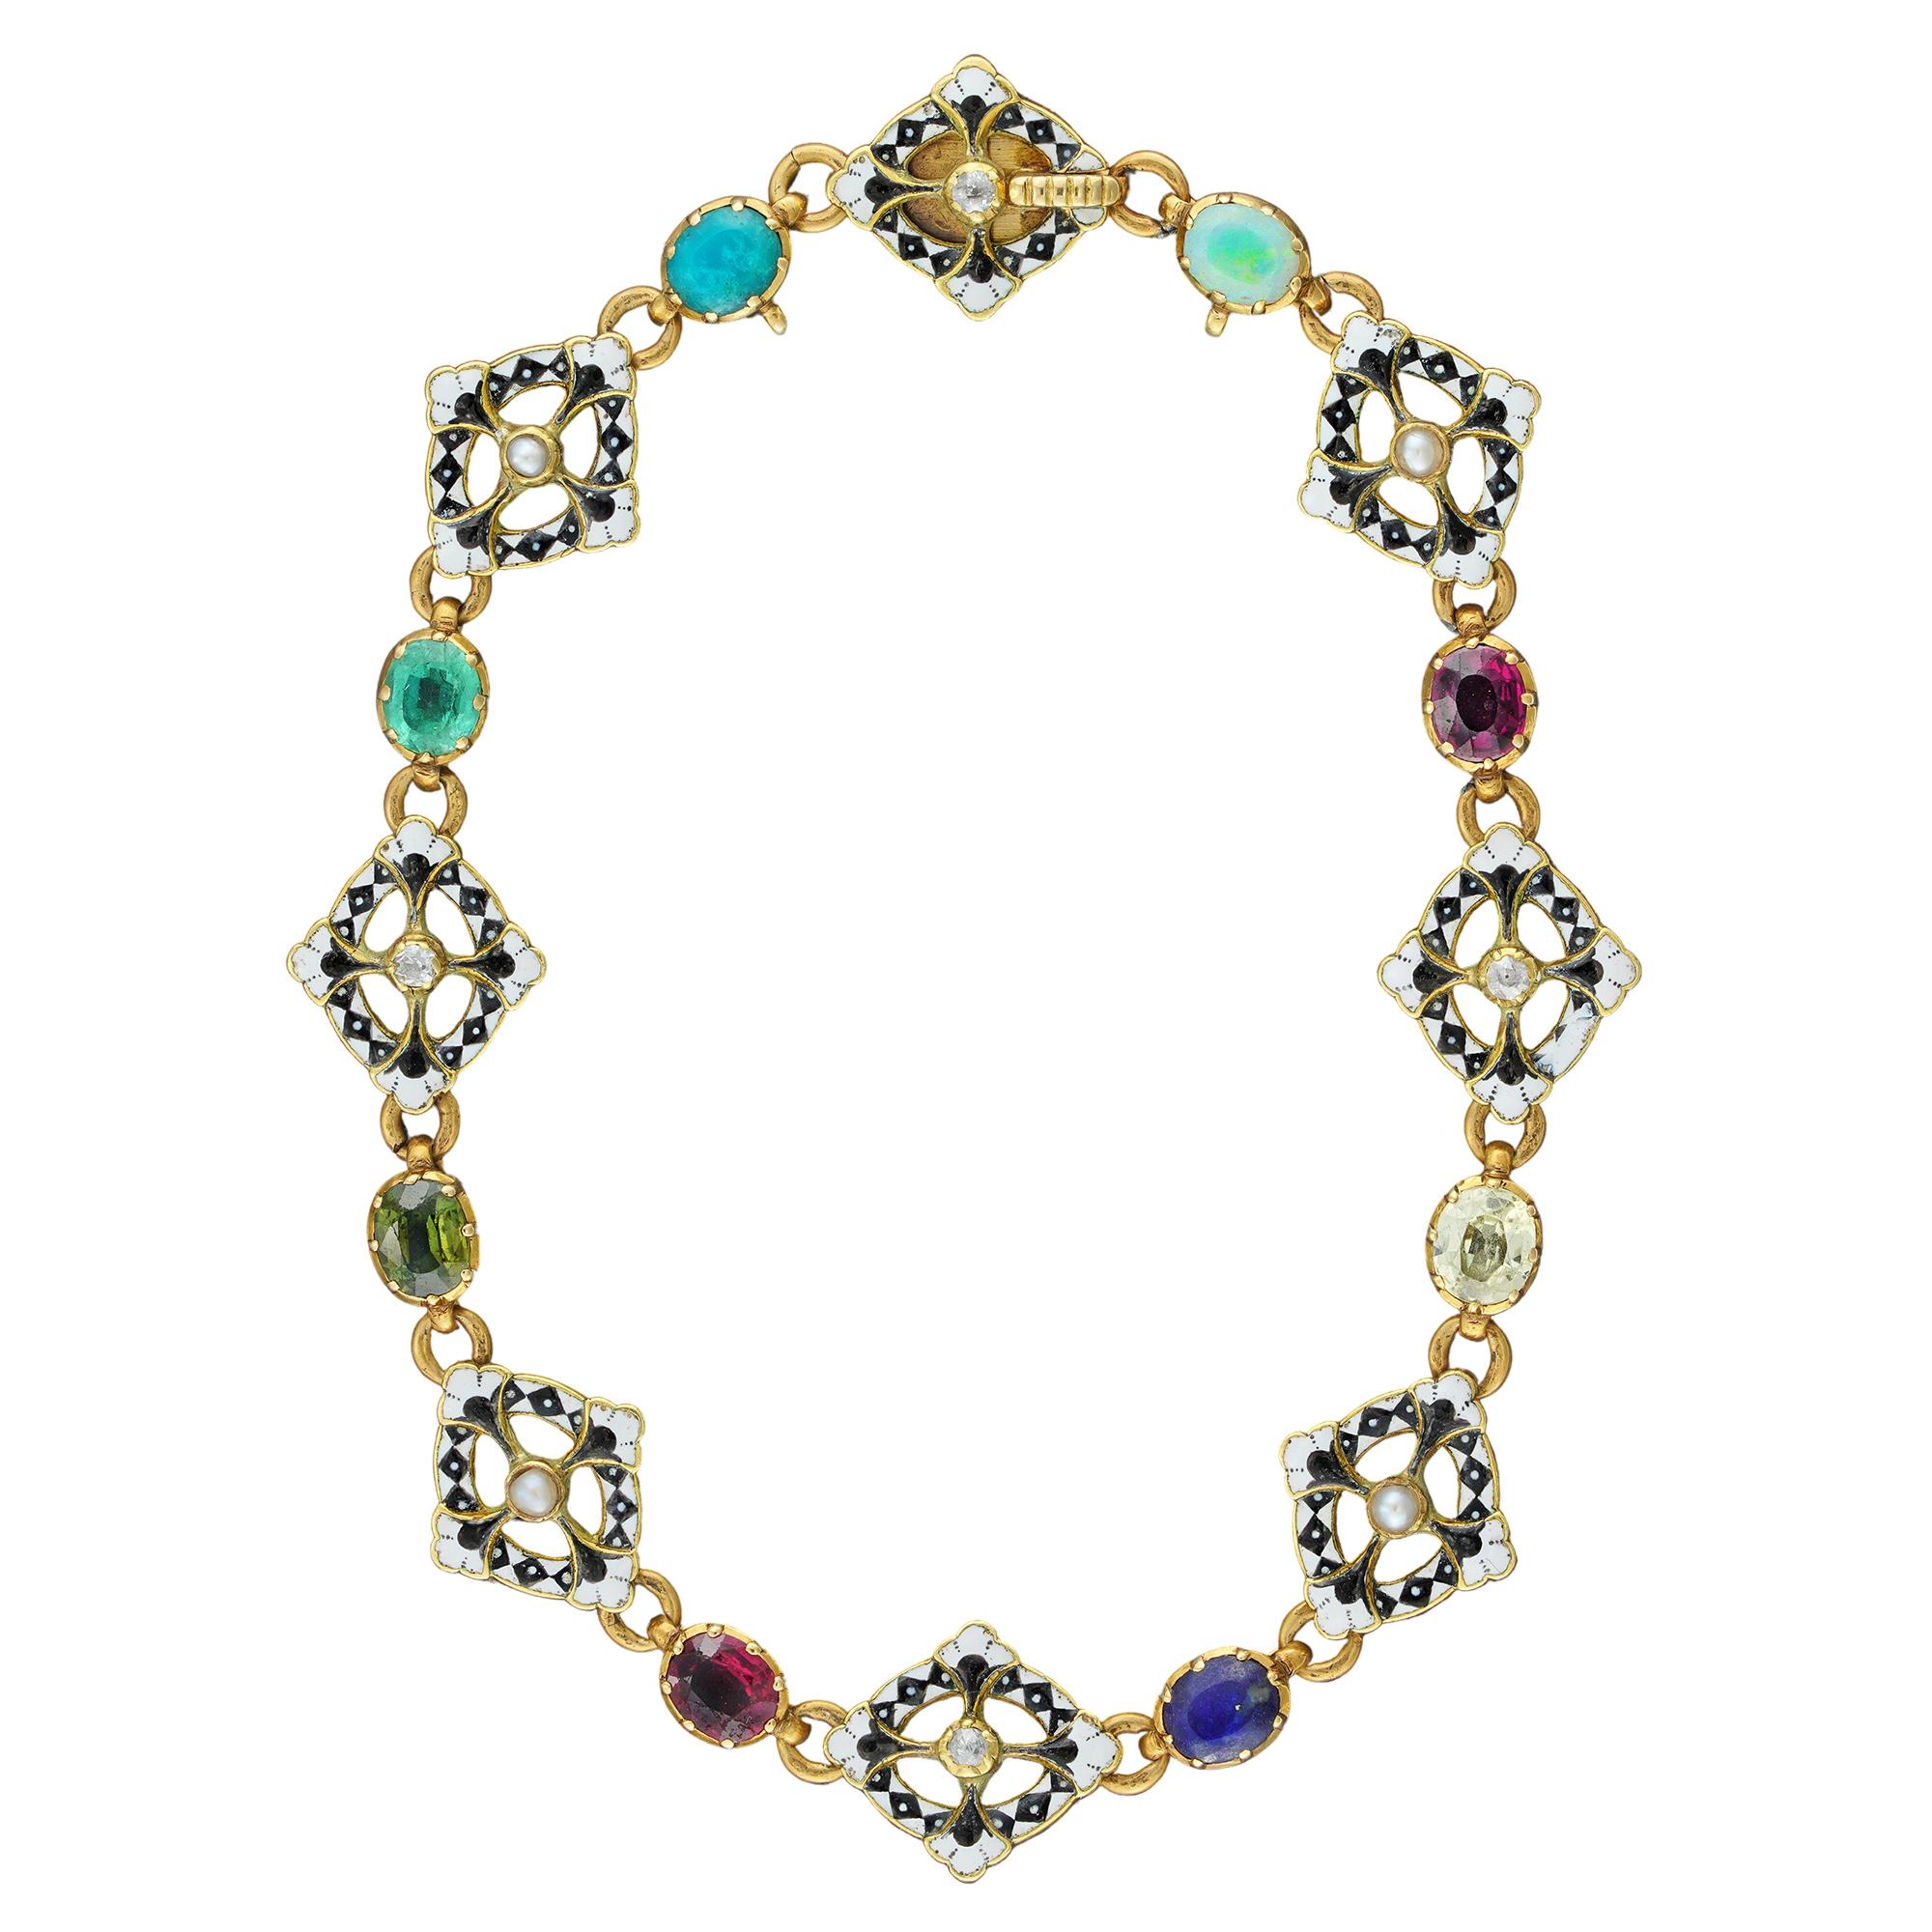 A gold and enamel gemset bracelet by Giuliano, with eight open lozenge-shaped links, each measuring approximately 15x13mm, set to centre with alternating cushion-shaped diamonds or half-pearls, within a quatrefoil frame decorated with black and